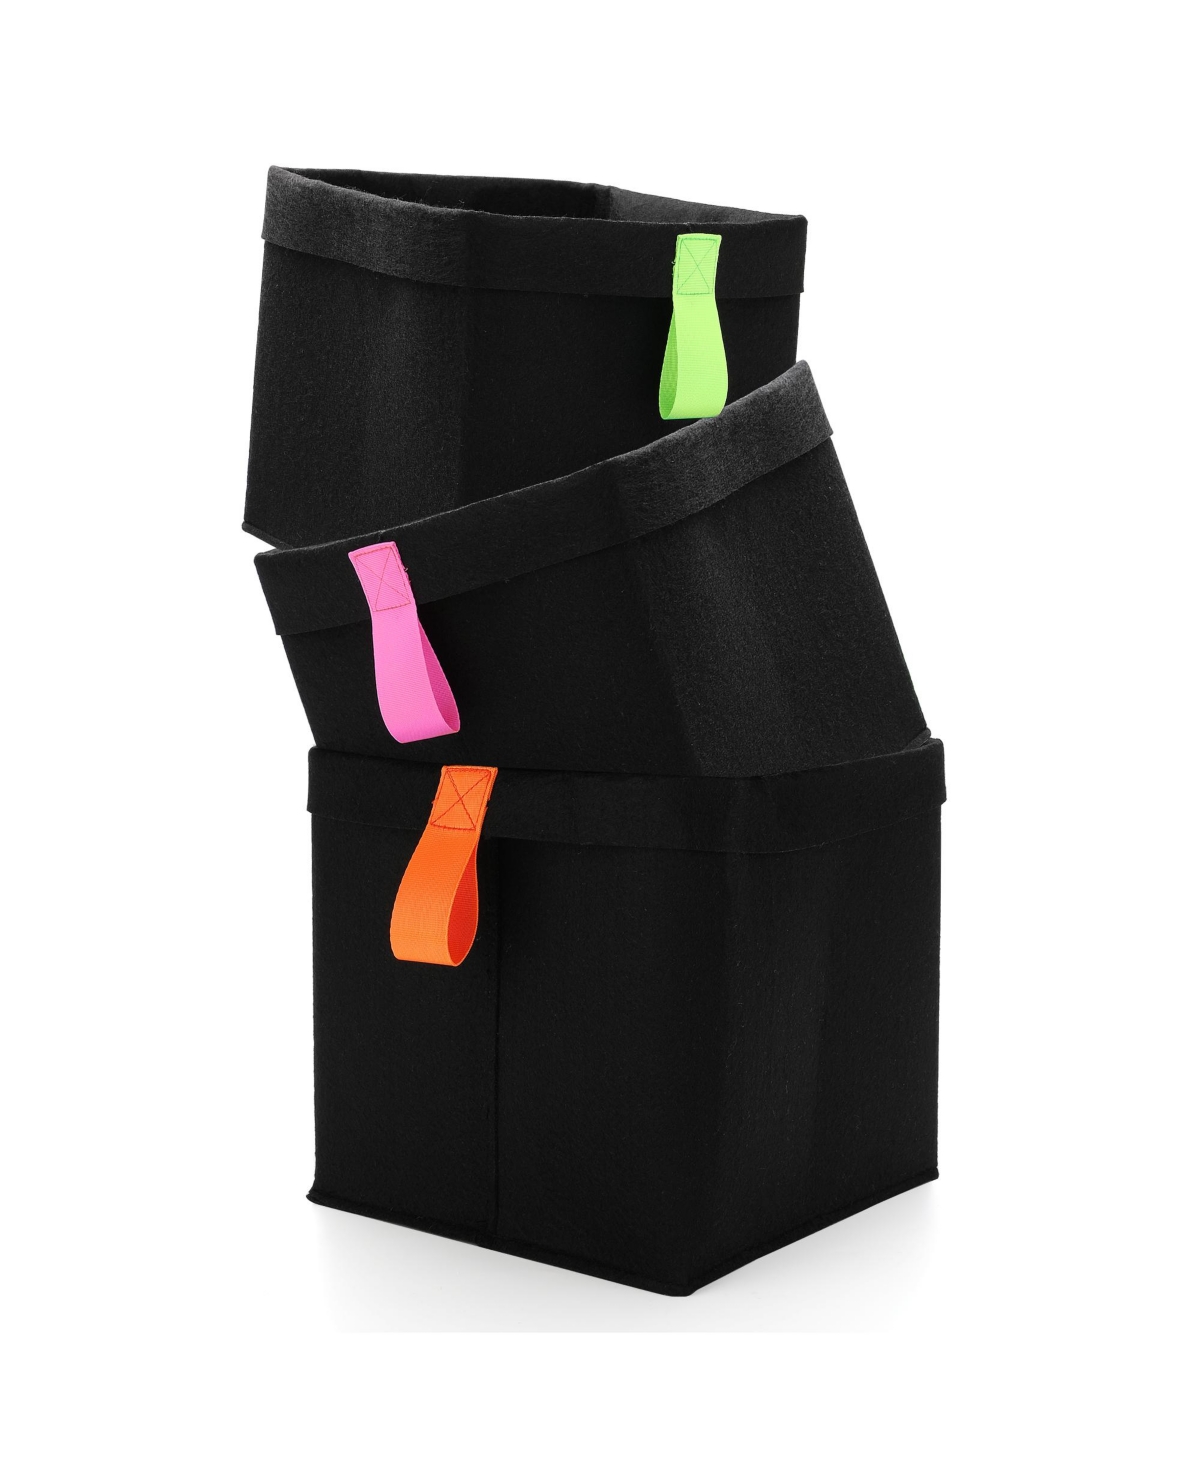 Welaxy 3 Piece Collapsible Square Storage Bins With Assorted Colored Handles In Black